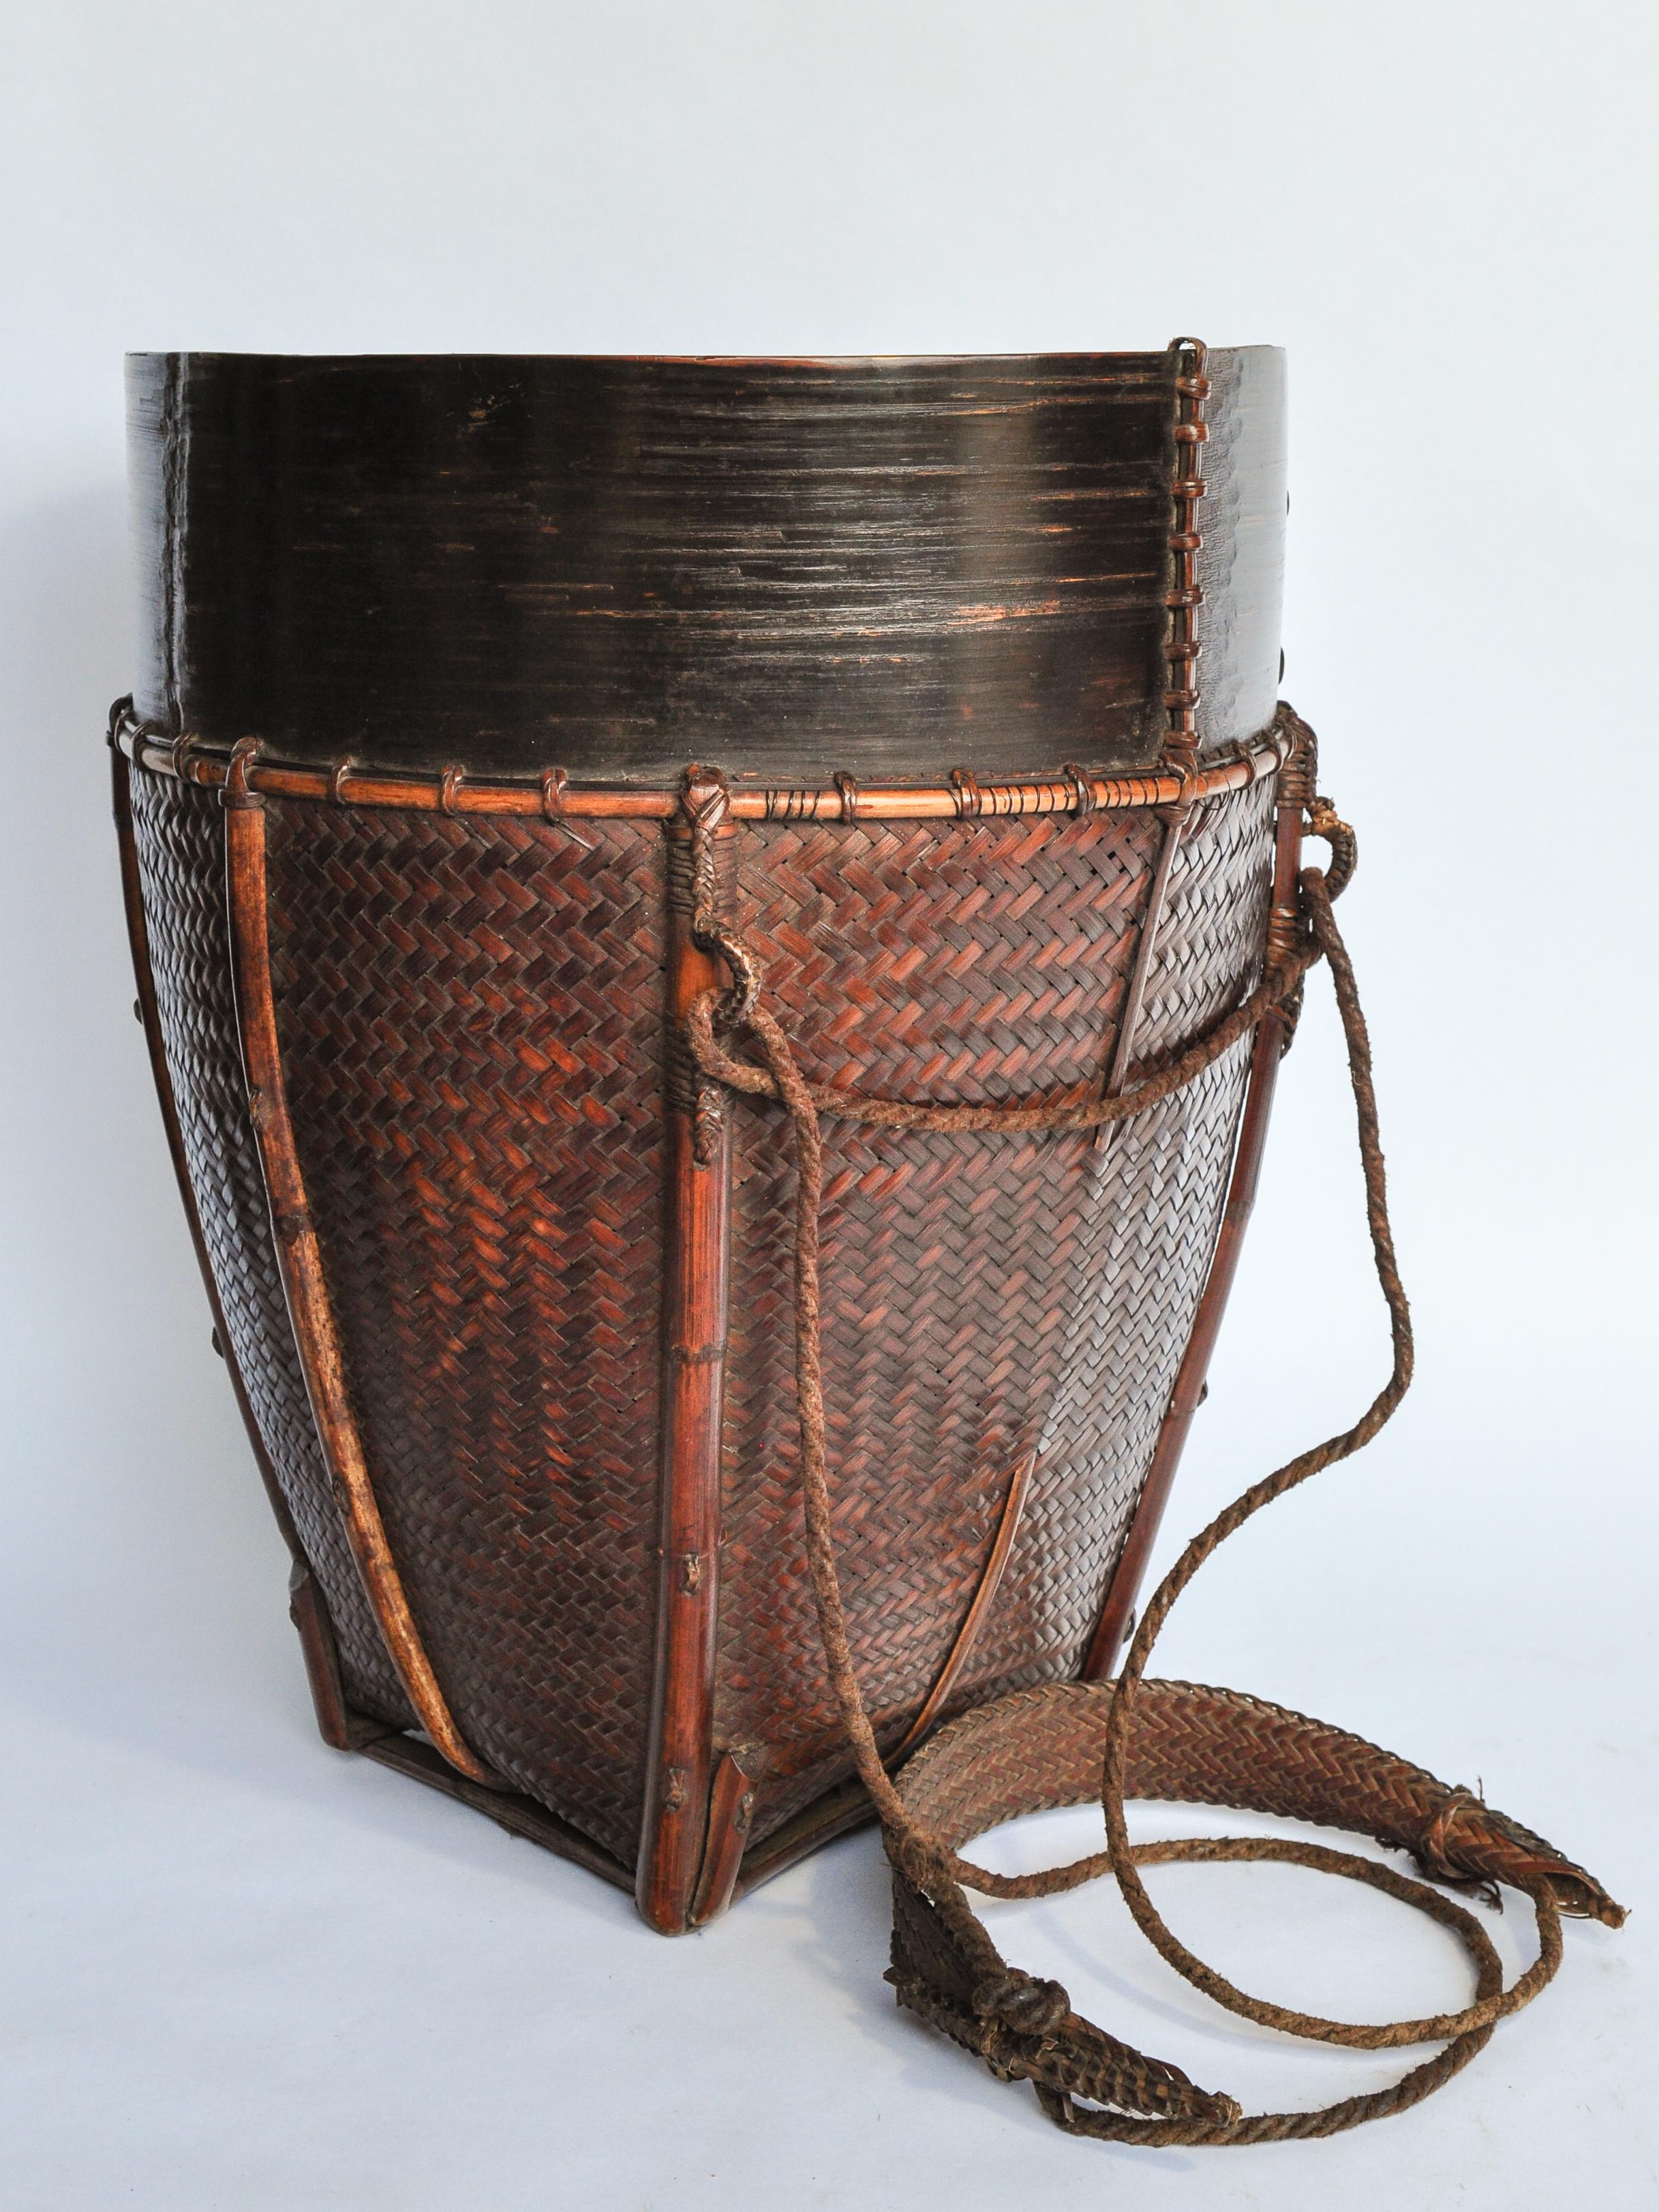 Hand-Crafted Vintage Carrying and Storage Basket Rawang People of Burma, Mid-20th Century